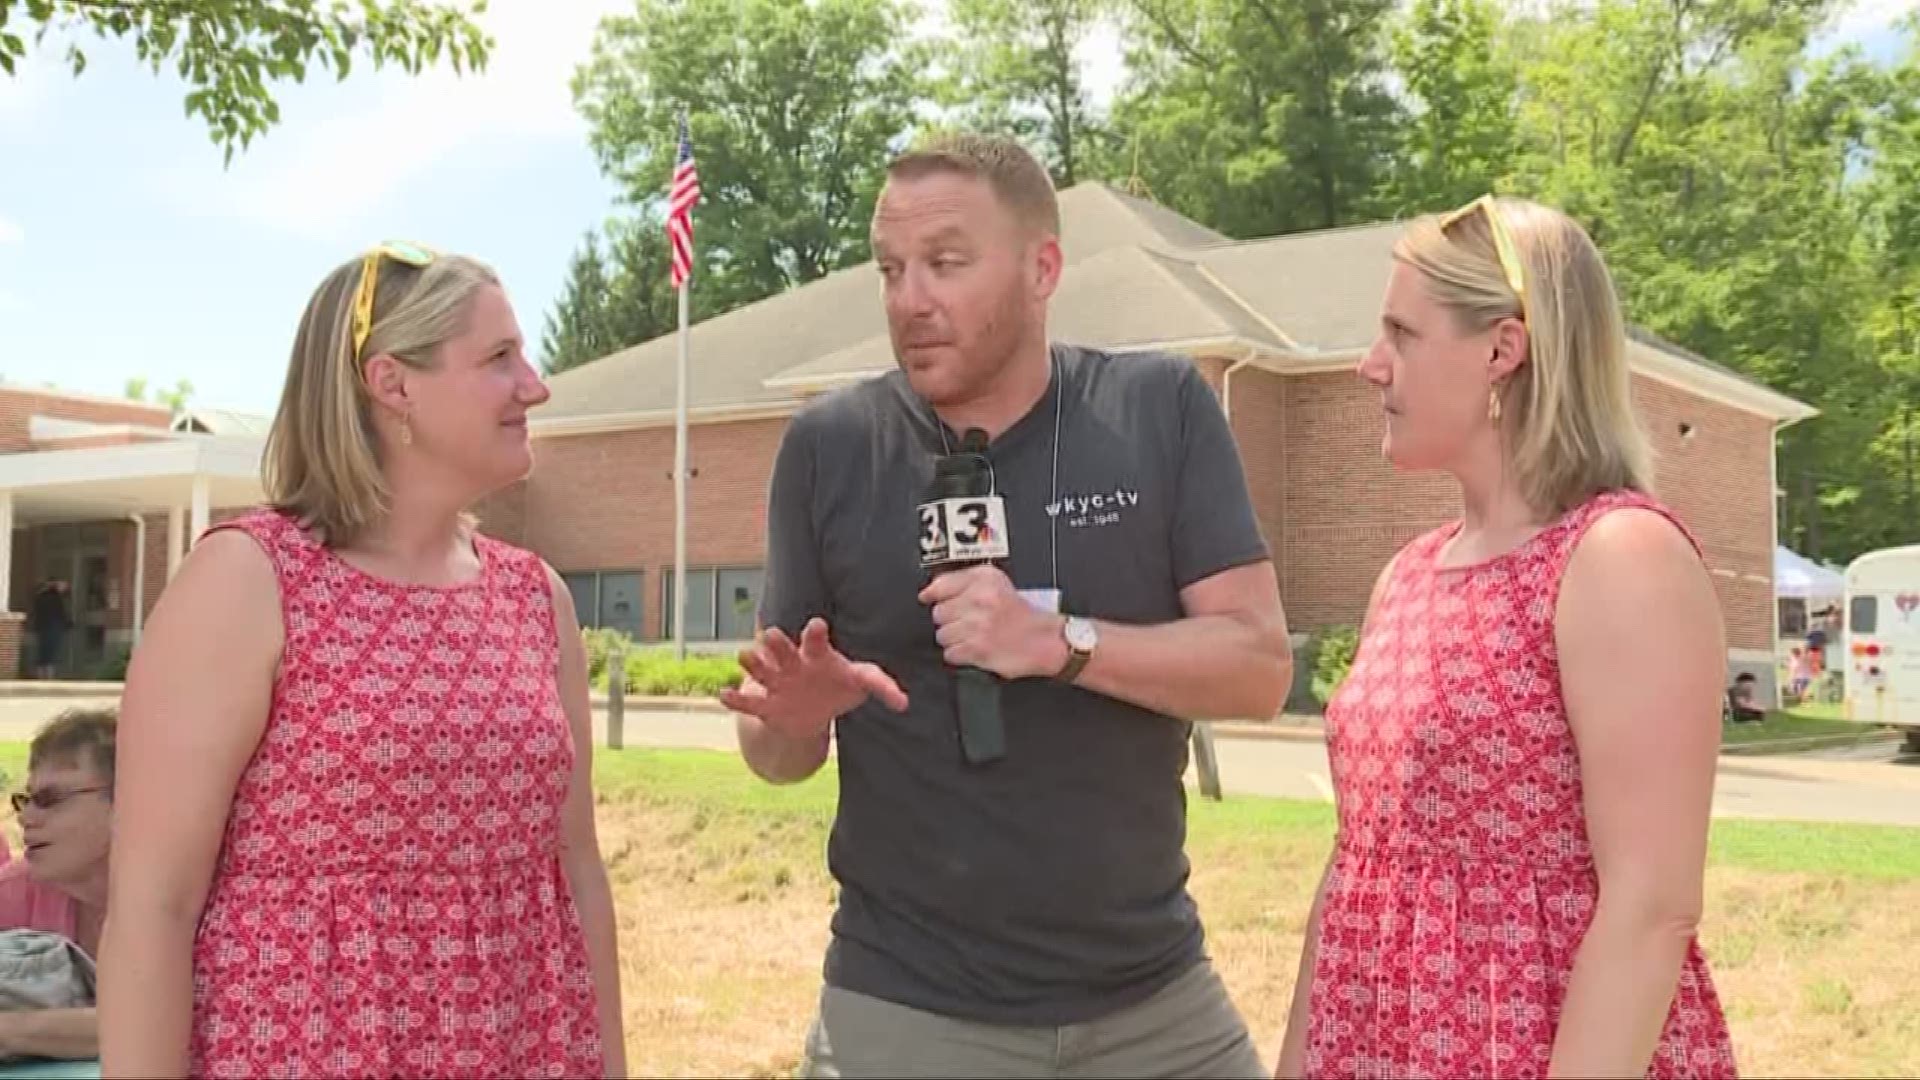 The 2019 festival was held on August 2-4, and we decided to send WKYC's own Mike Polk Jr. to check it out.